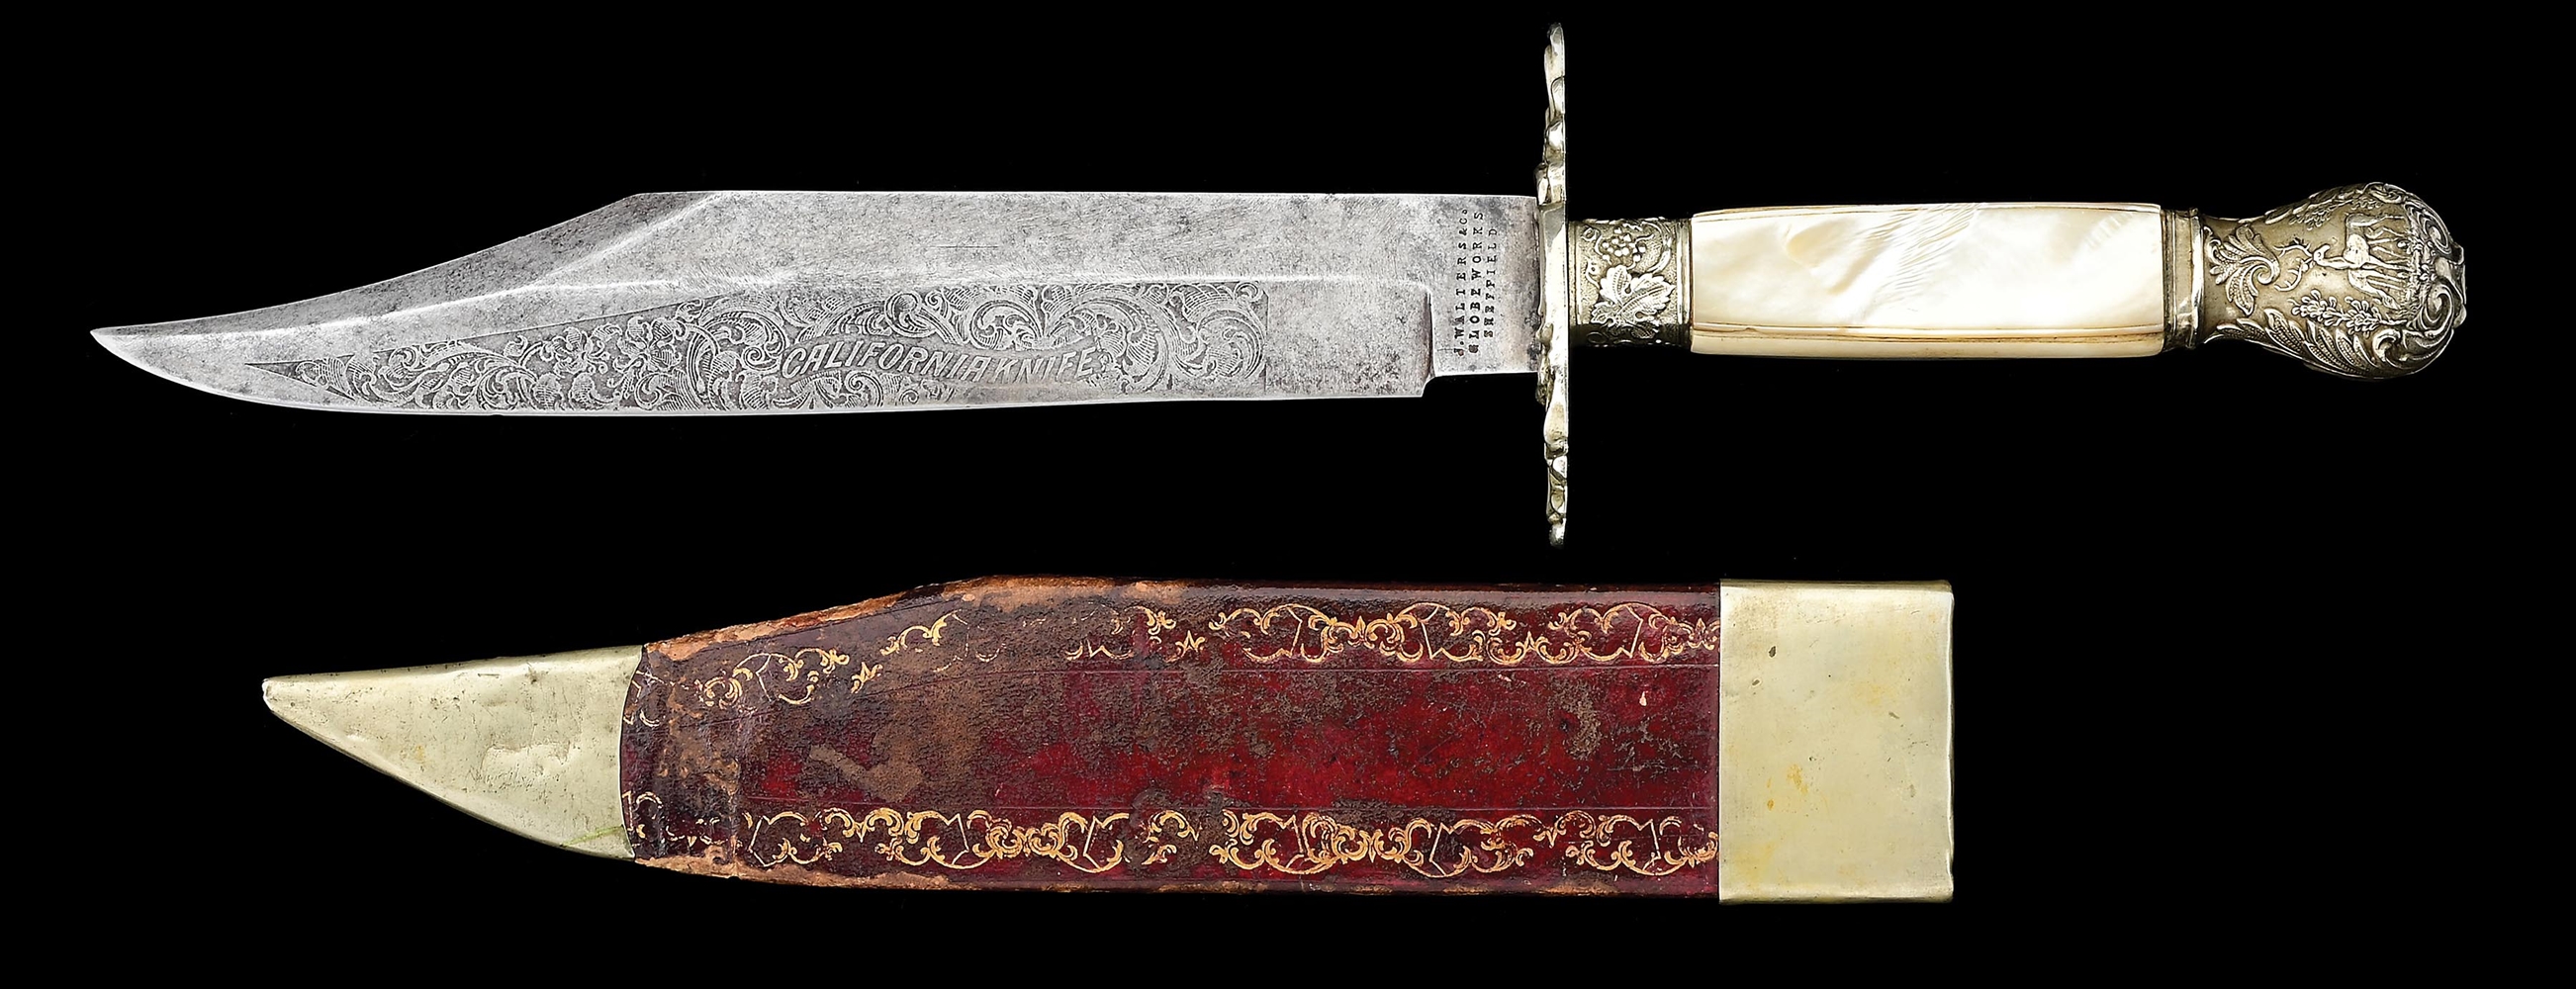 J. WALTERS & COMPANY SHEFFIELD CALIFORNIA BOWIE KNIFE WITH SILVER AND MOTHER OF PEARL GRIPS.